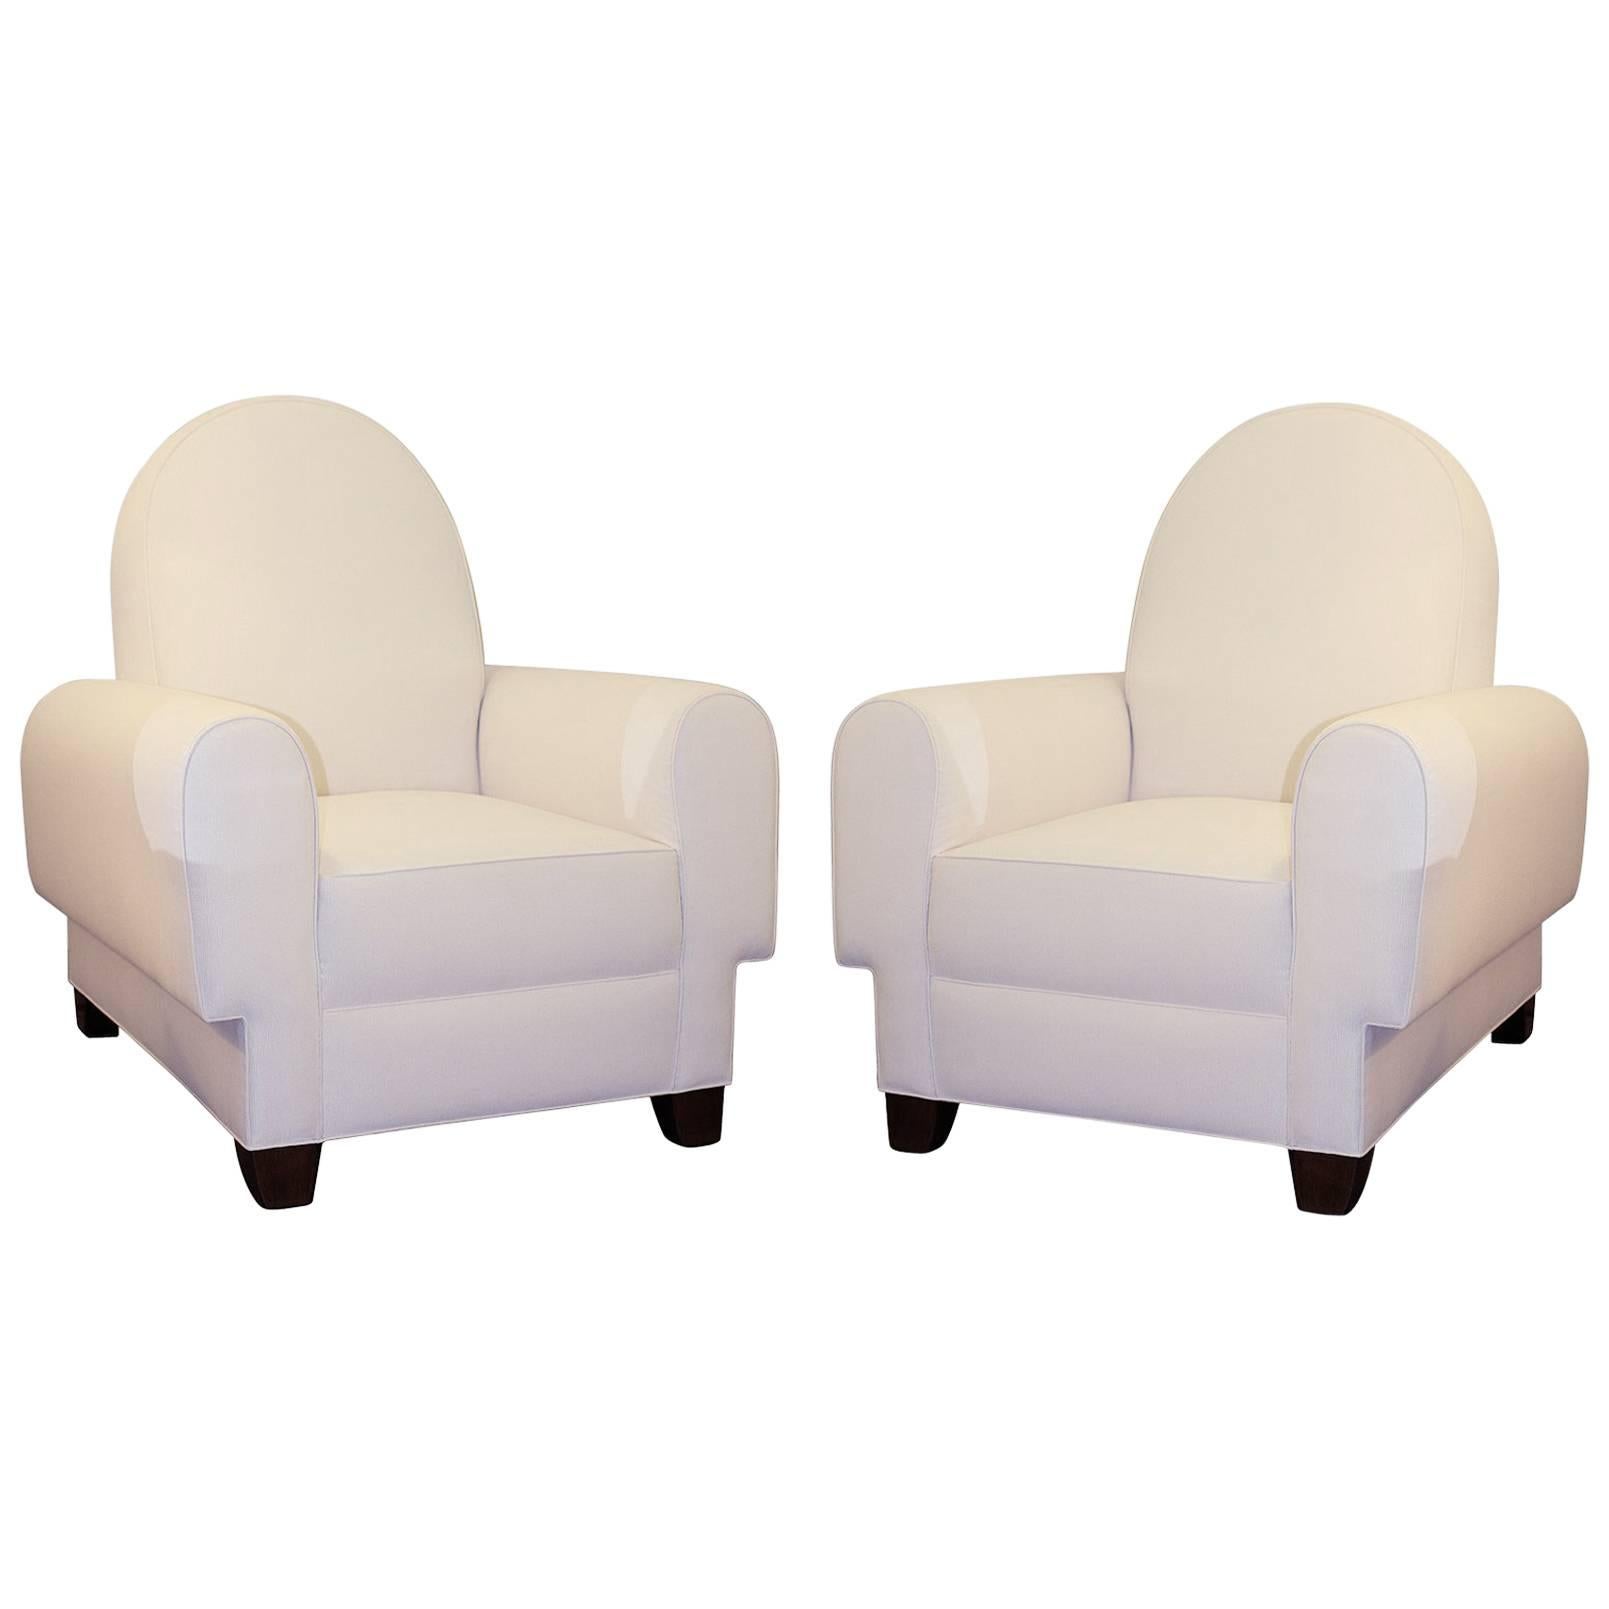 French Art Deco Pair of Chairs 1950